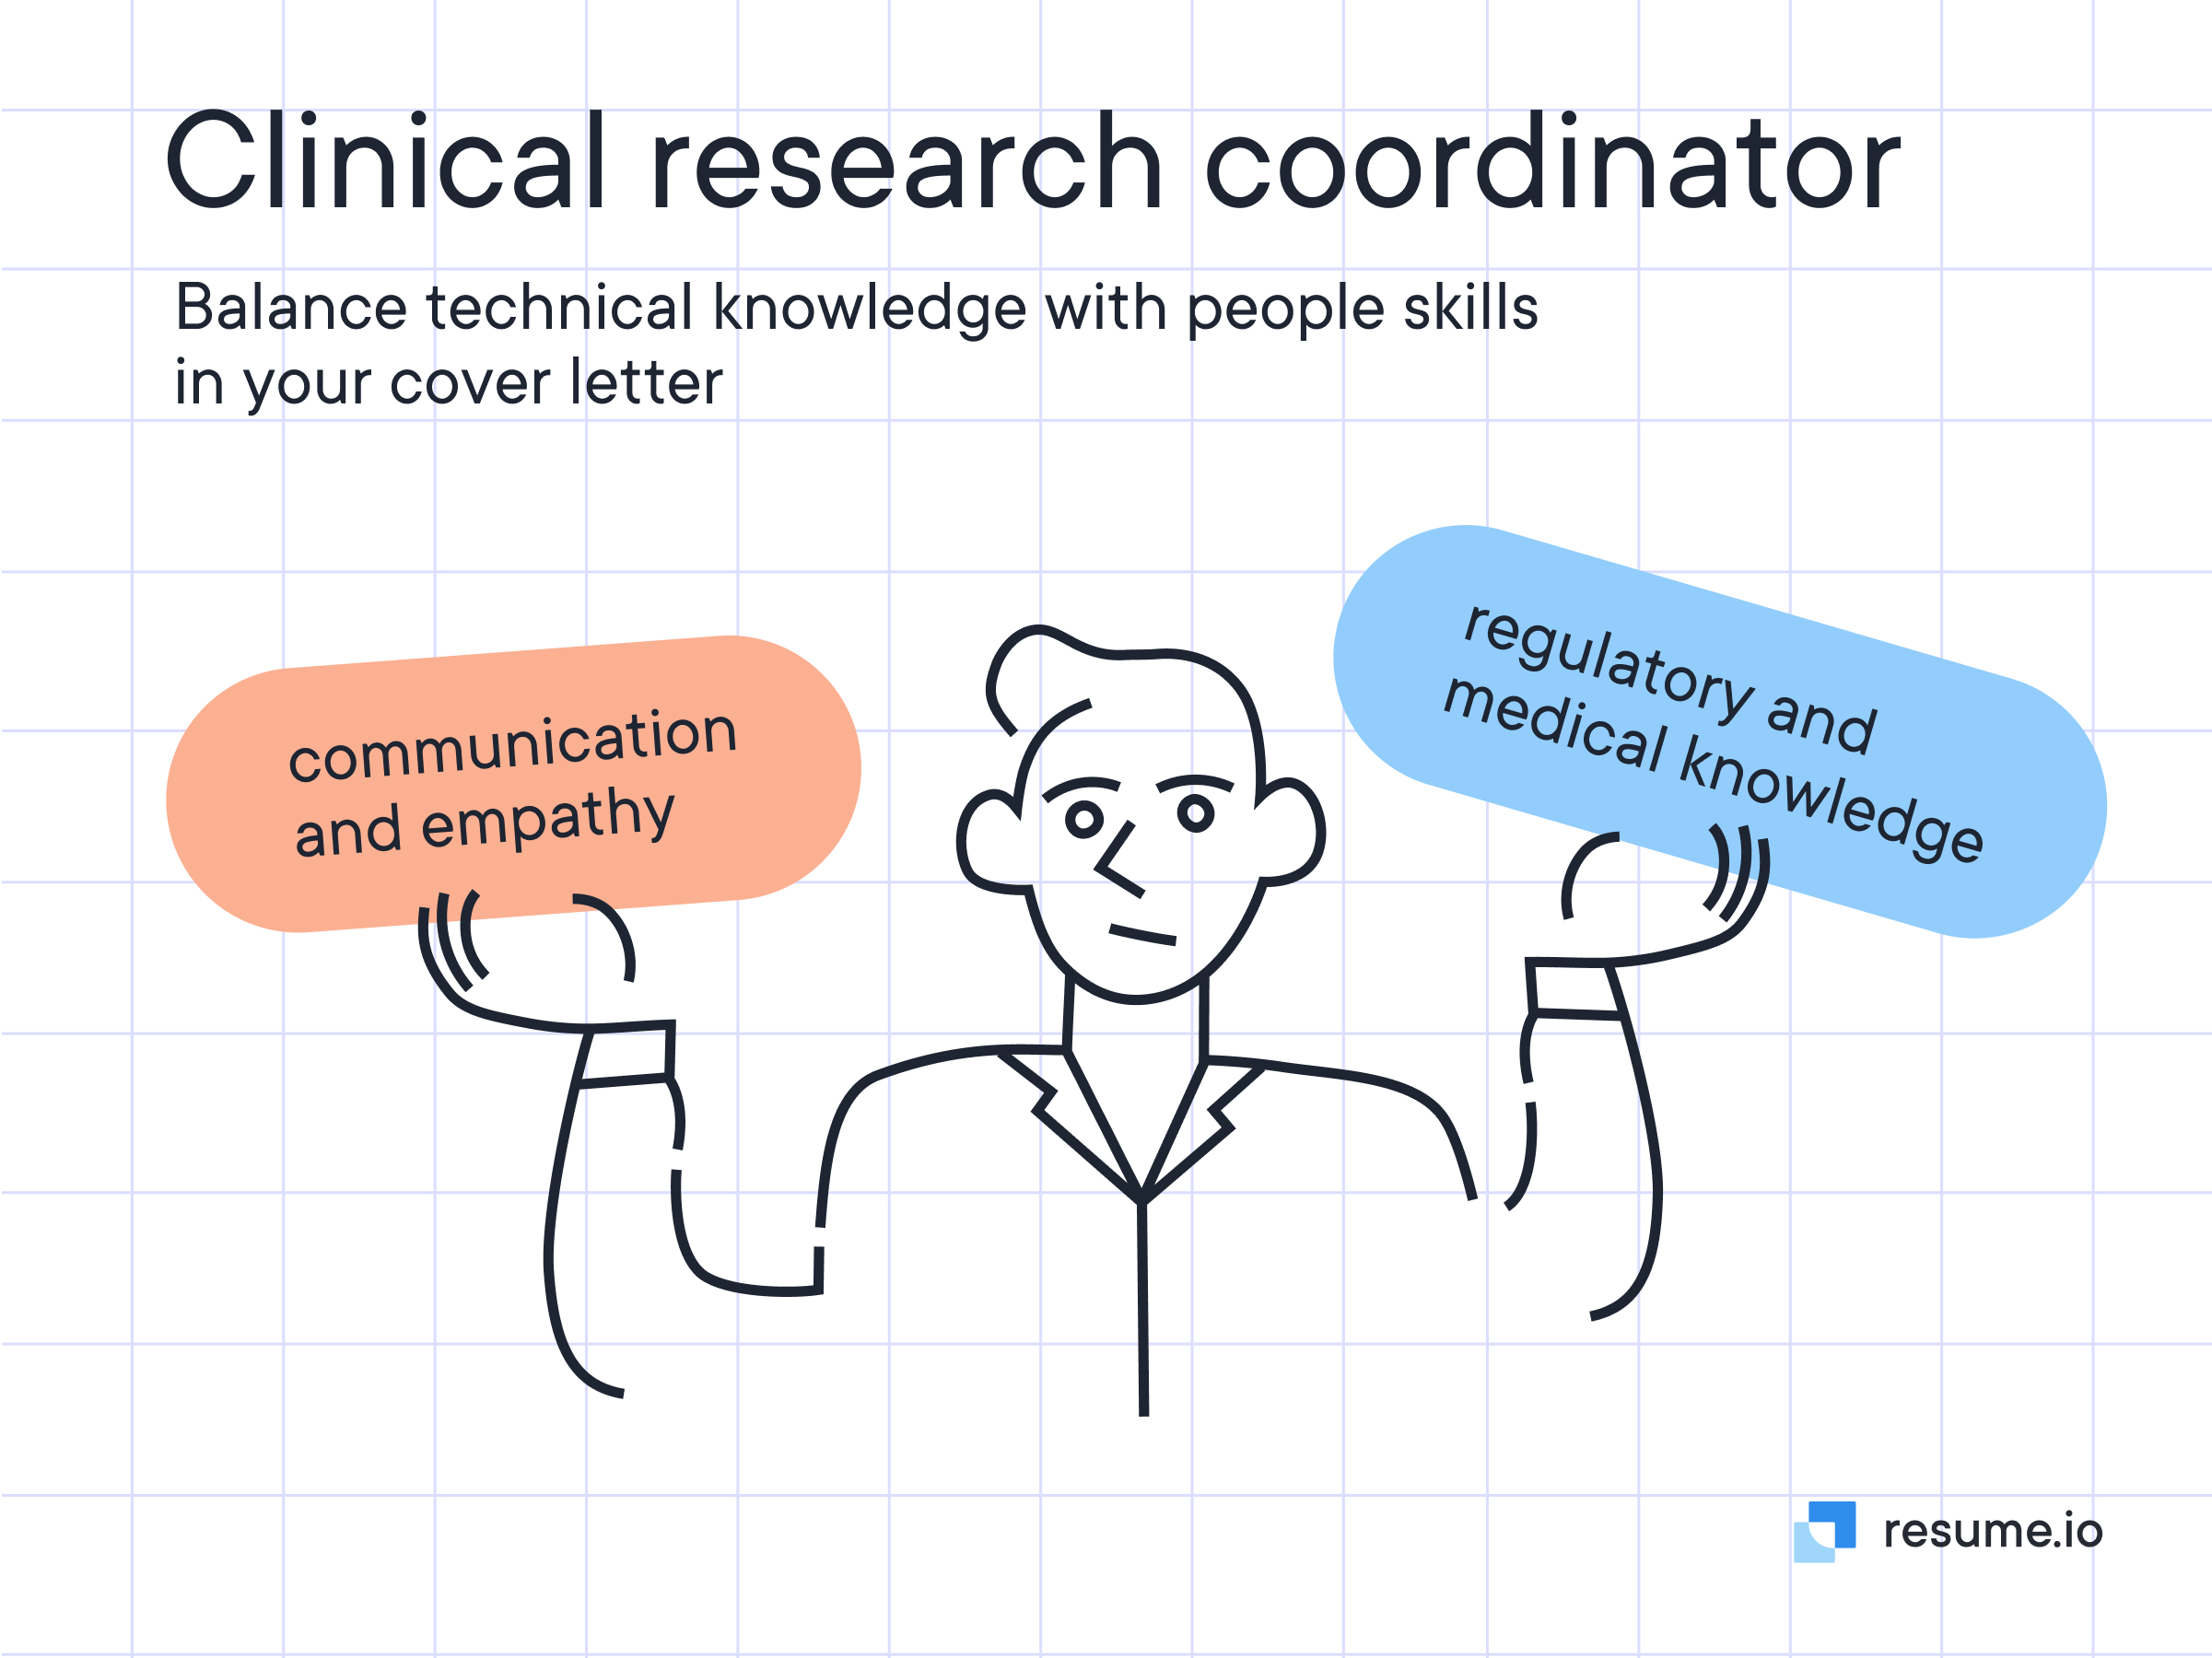 Clinical research coordinator shows the technical knowledge with people skills in cover letter